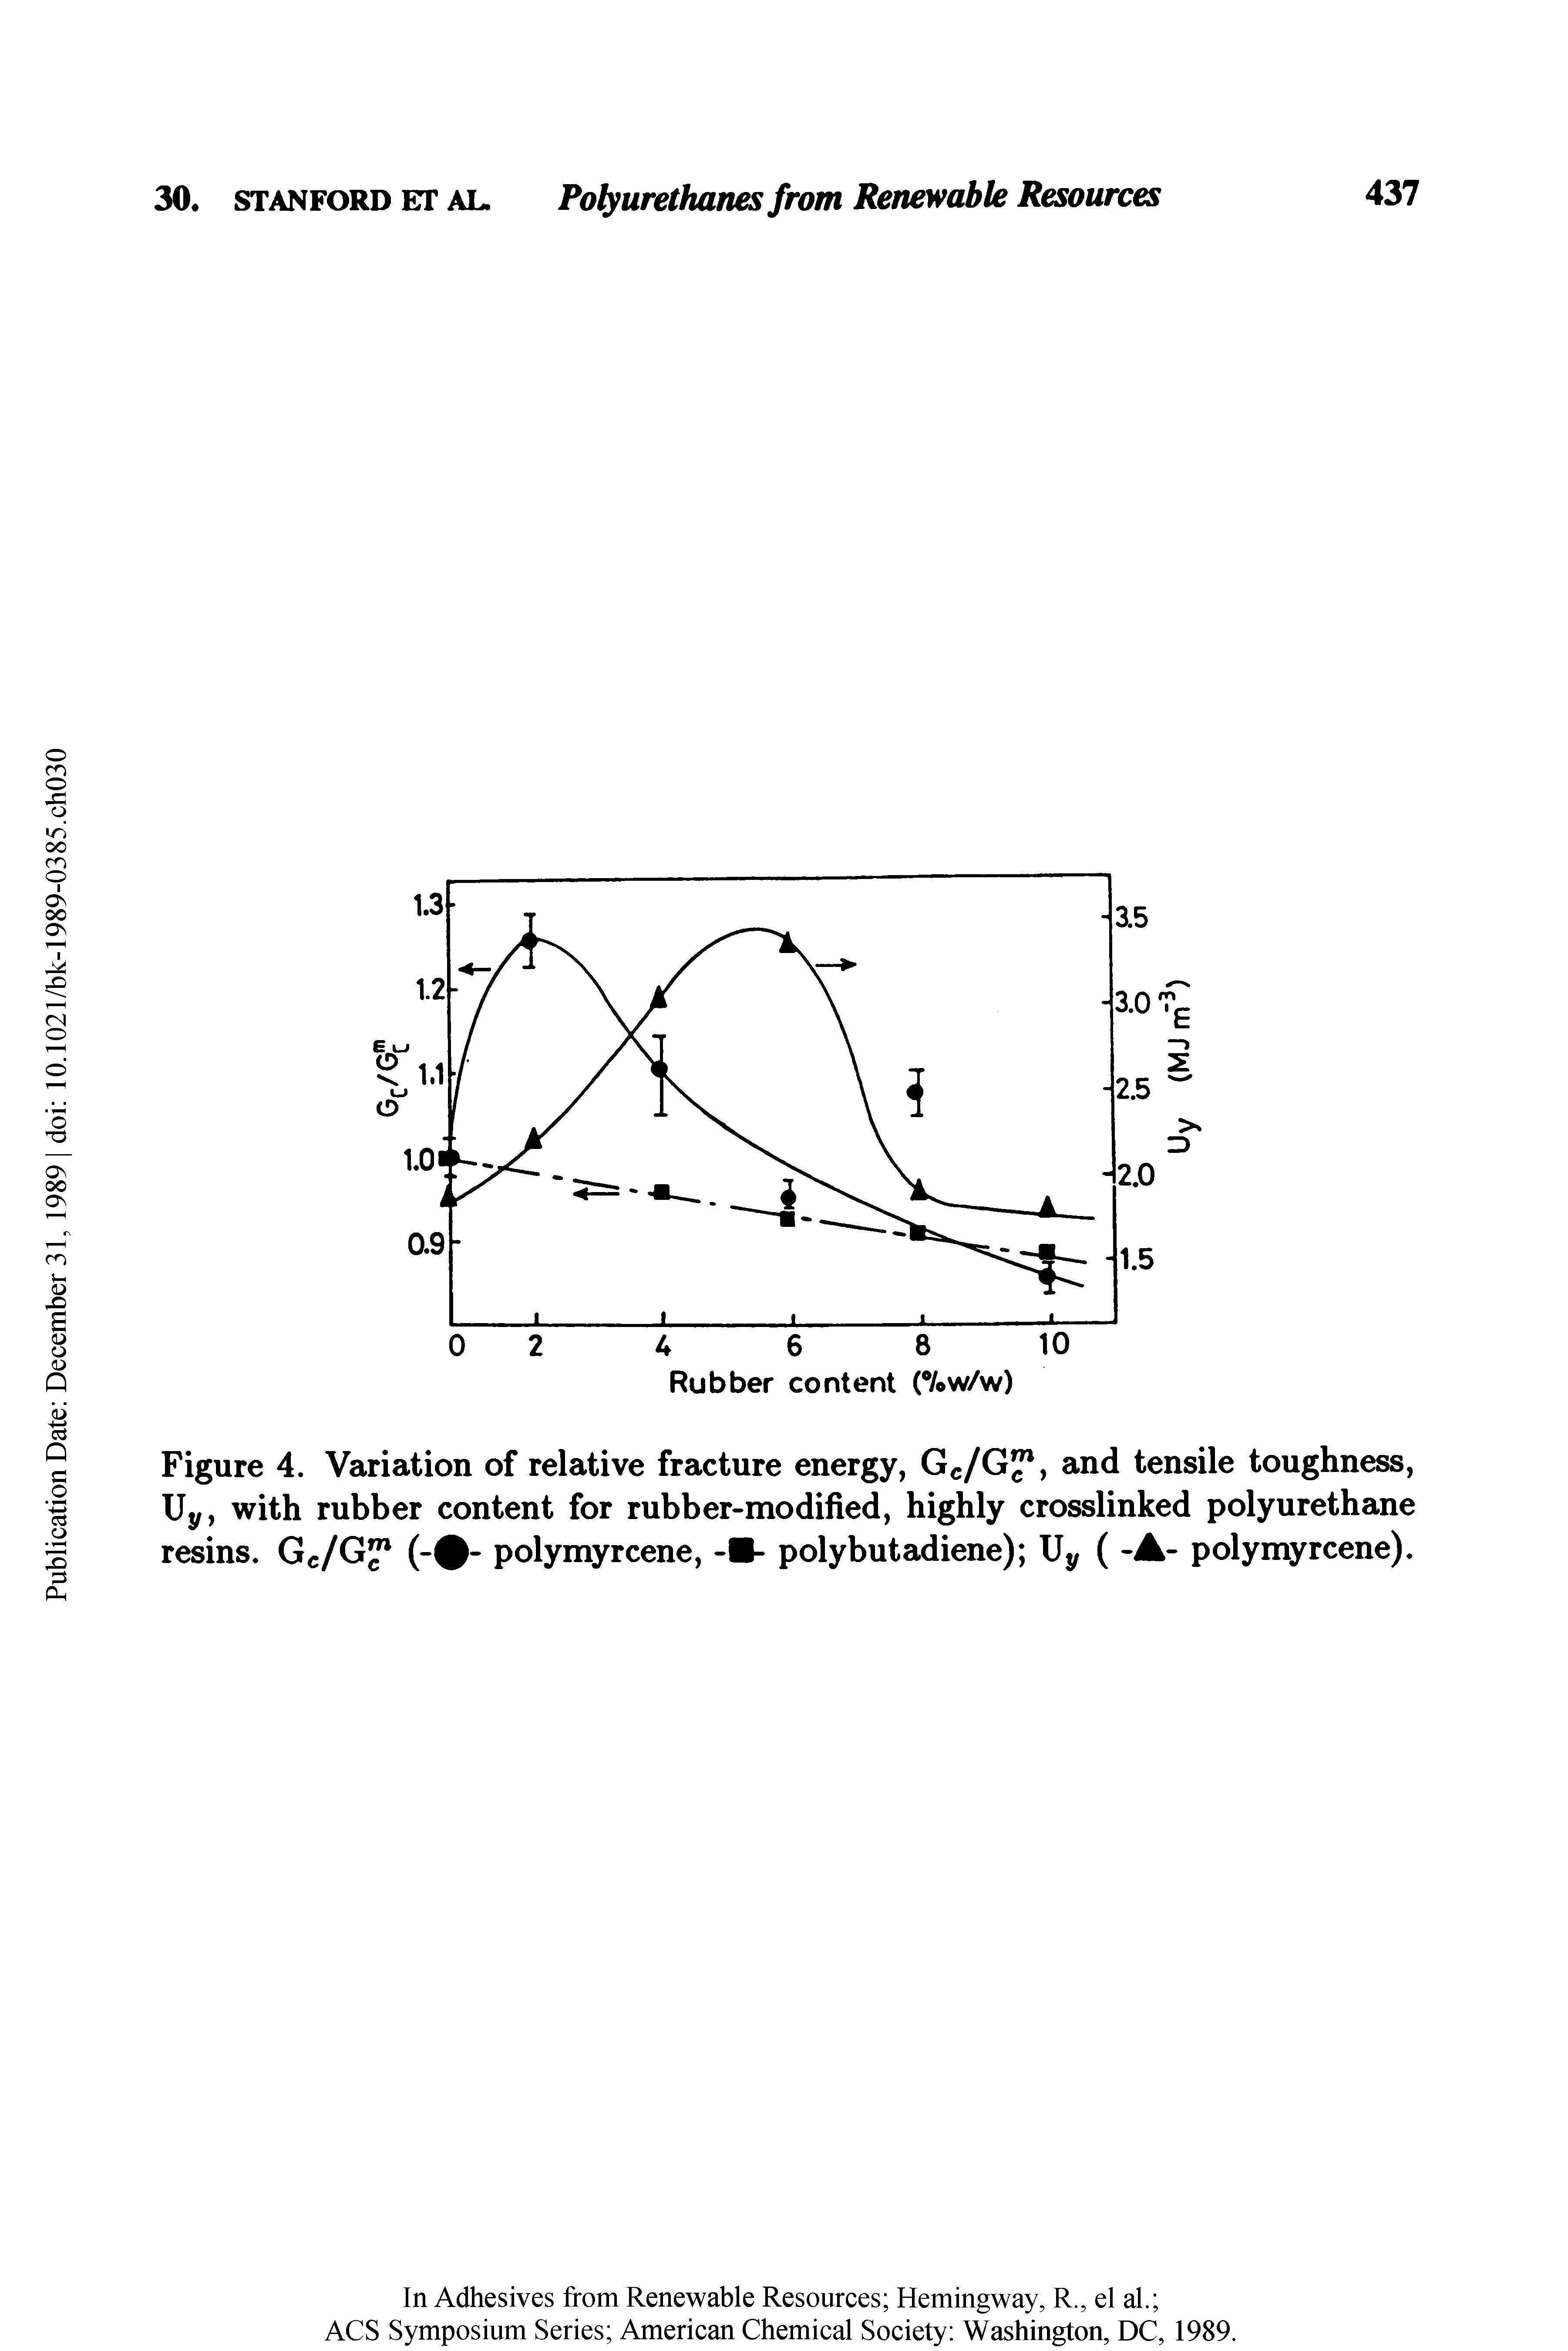 Figure 4. Variation of relative fracture energy, Gc/G , and tensile toughness, Uy, with rubber content for rubber-modified, highly crosslinked polyurethane resins. Gc/G (-0- polymyrcene, polybutadiene) Uy ( -A- polymyrcene).